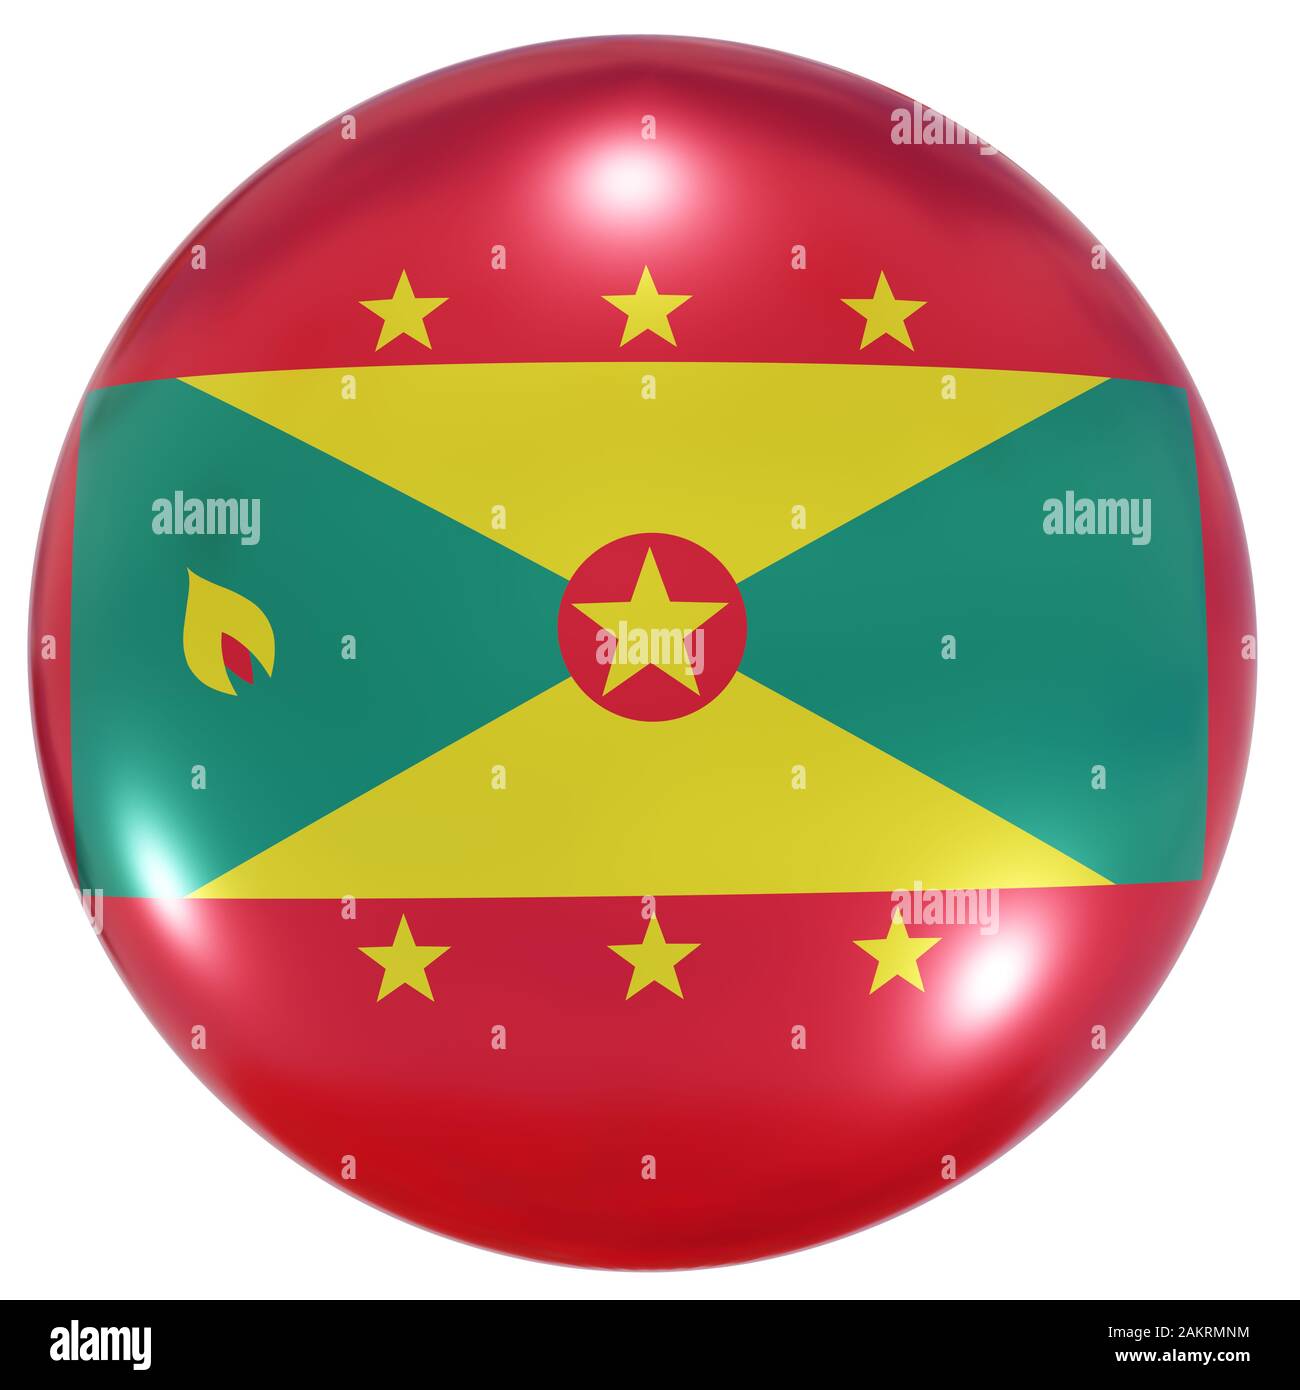 3d rendering of a Grenada national flag on a circle icon isolated on white background Stock Photo